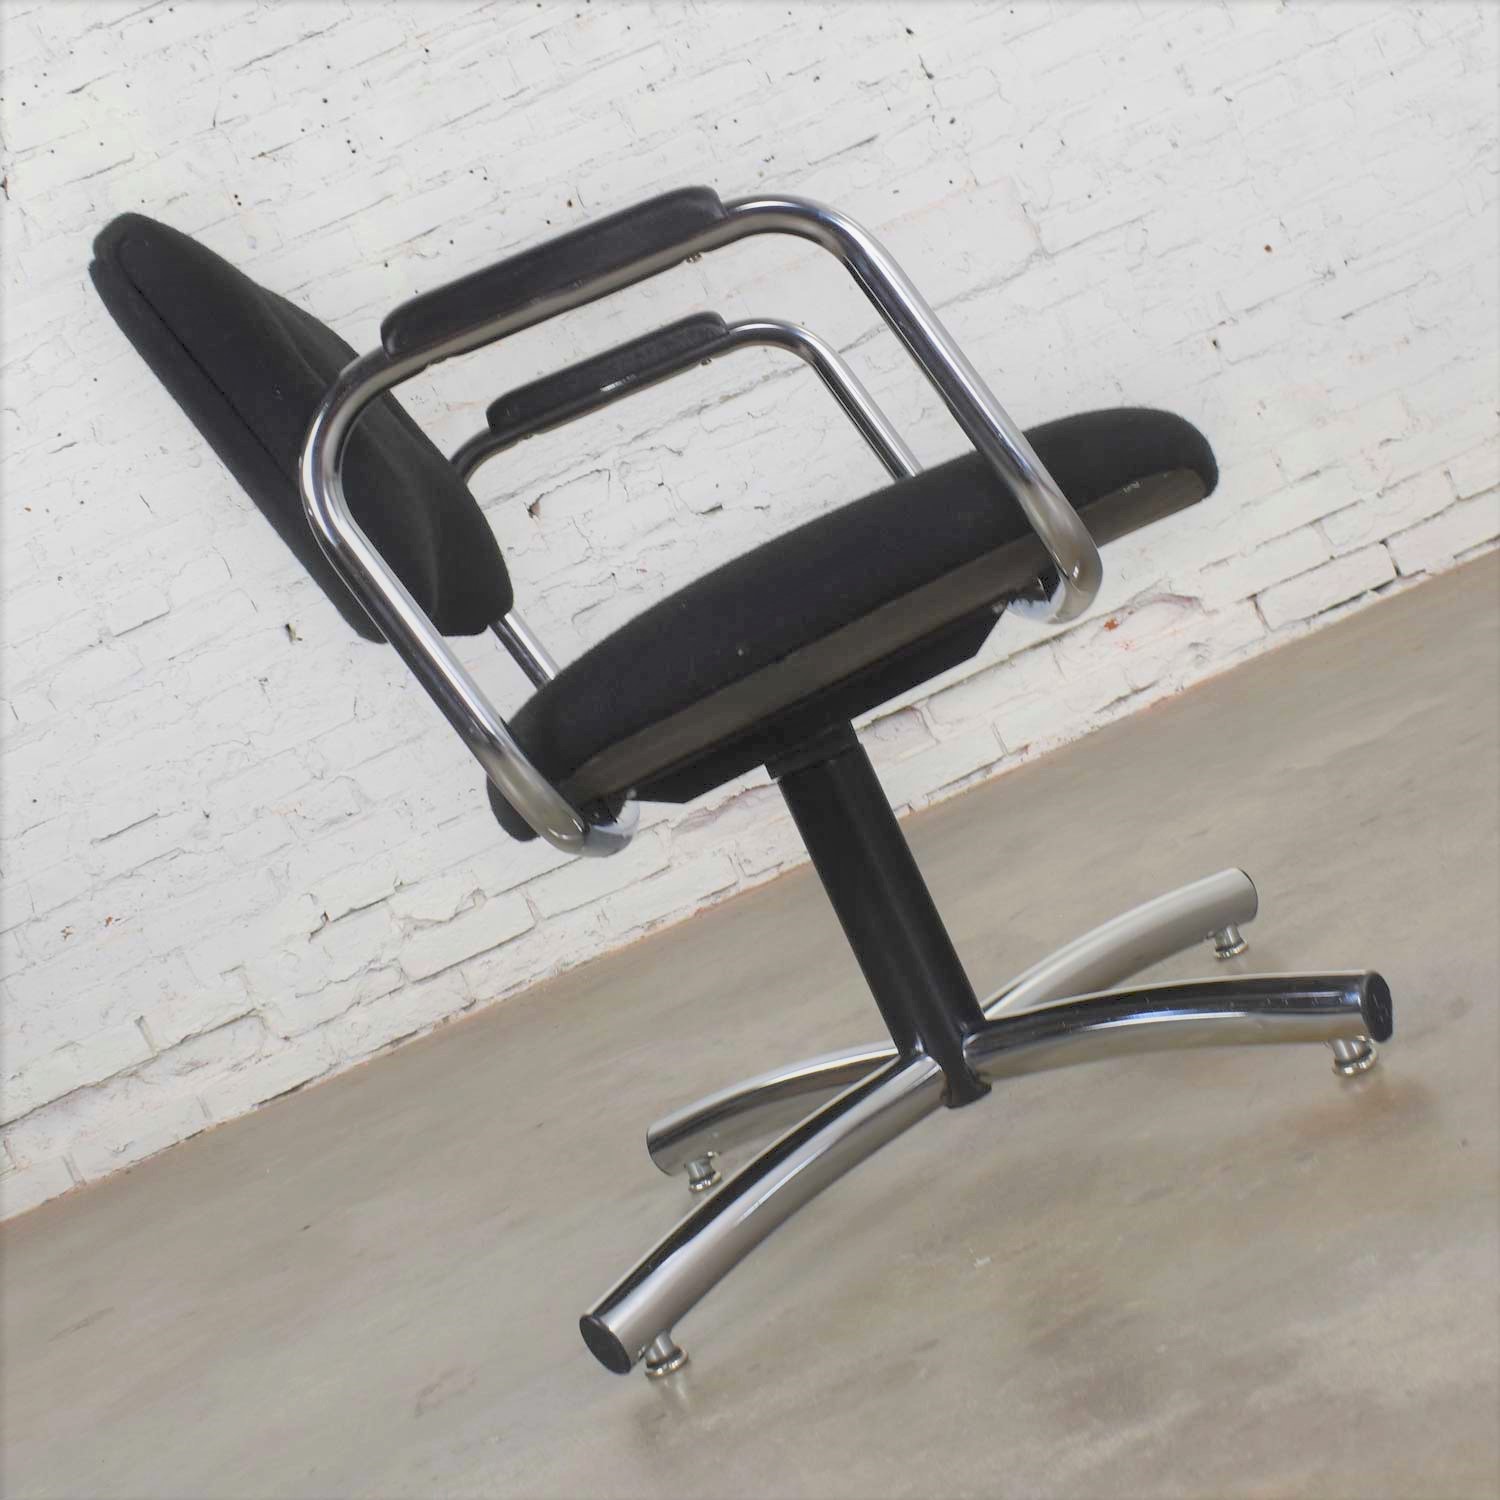 Vintage Modern Chrome & Black Office Armchair 4 Prong Base Style Steelcase 1970